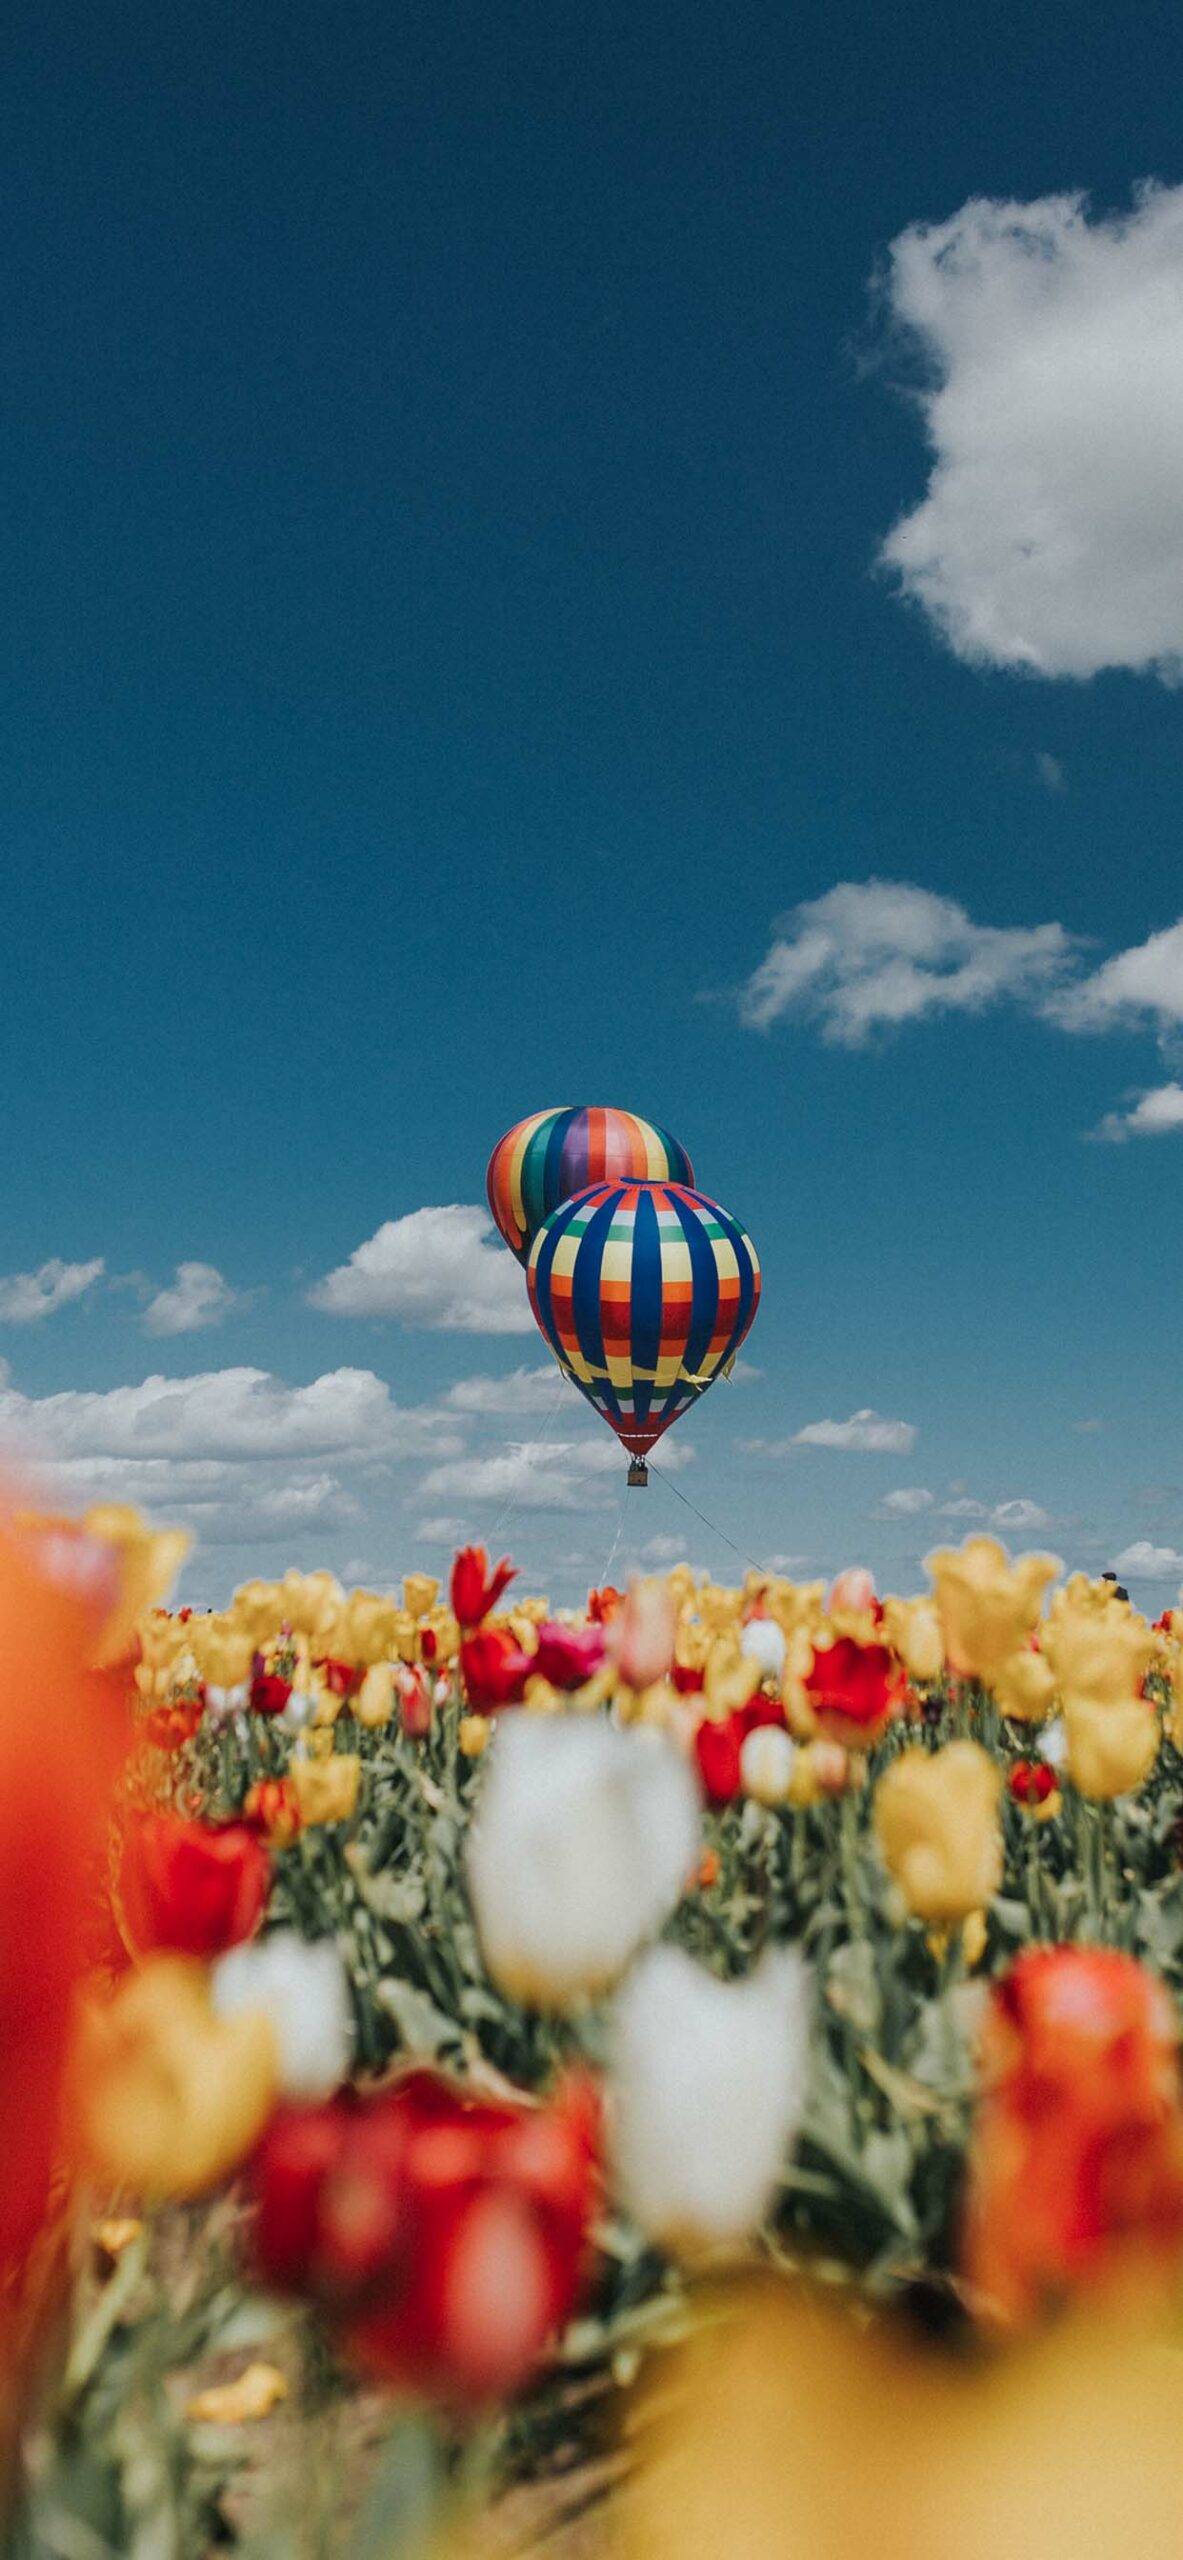 A hot air balloon flying over some flowers - Spring